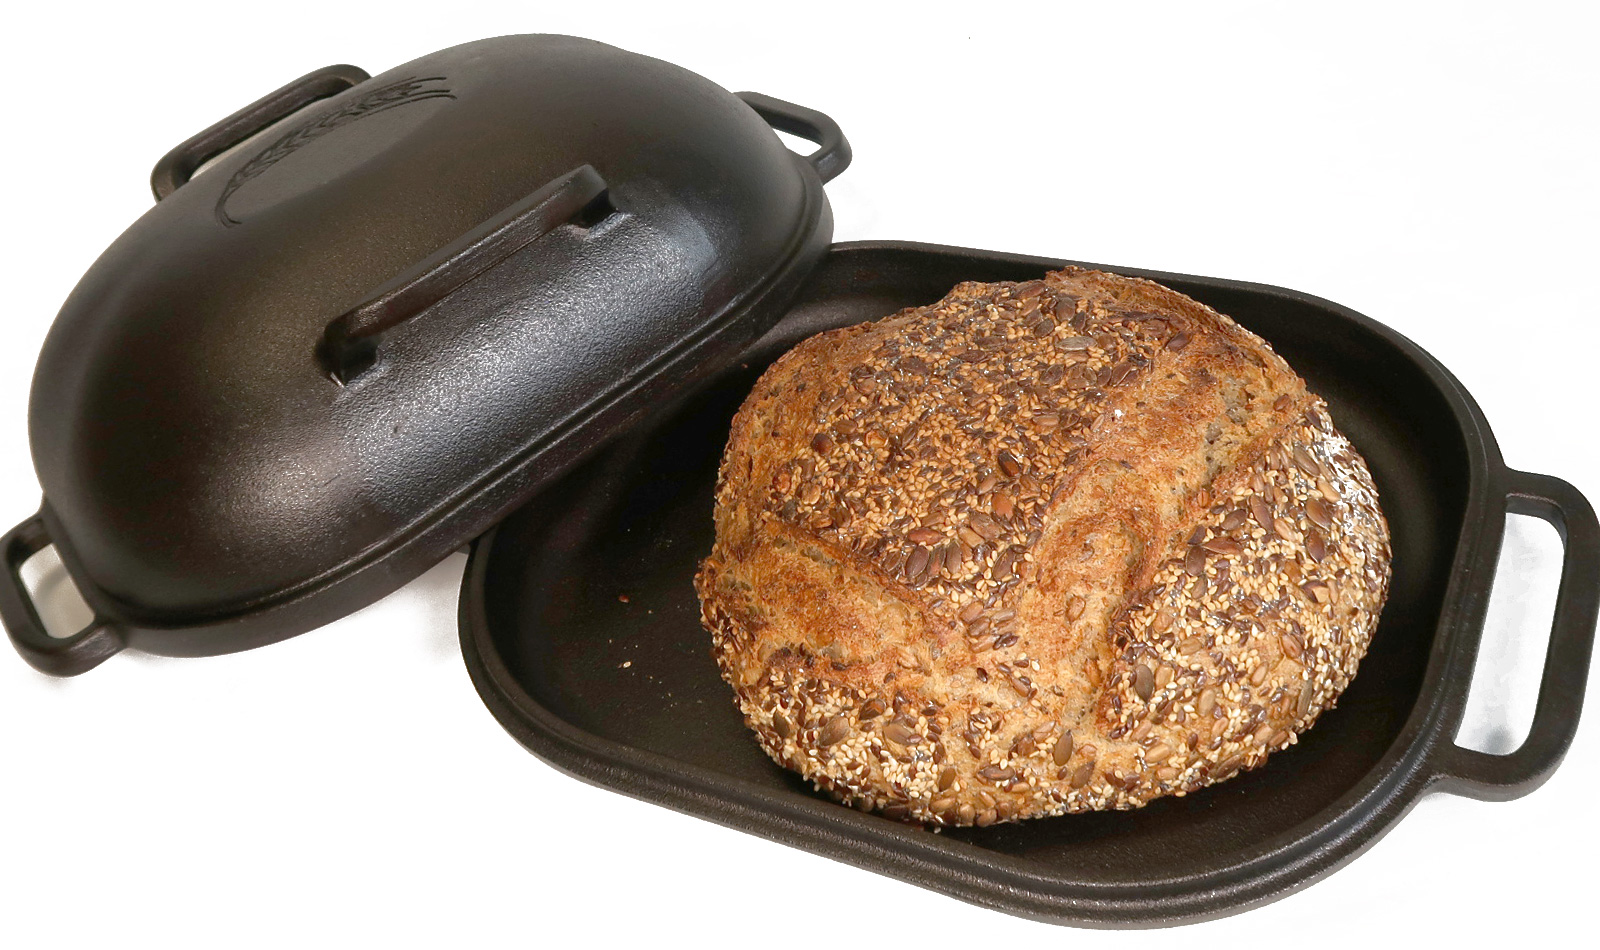 Challenger Bread Pan, Free Shipping from UK